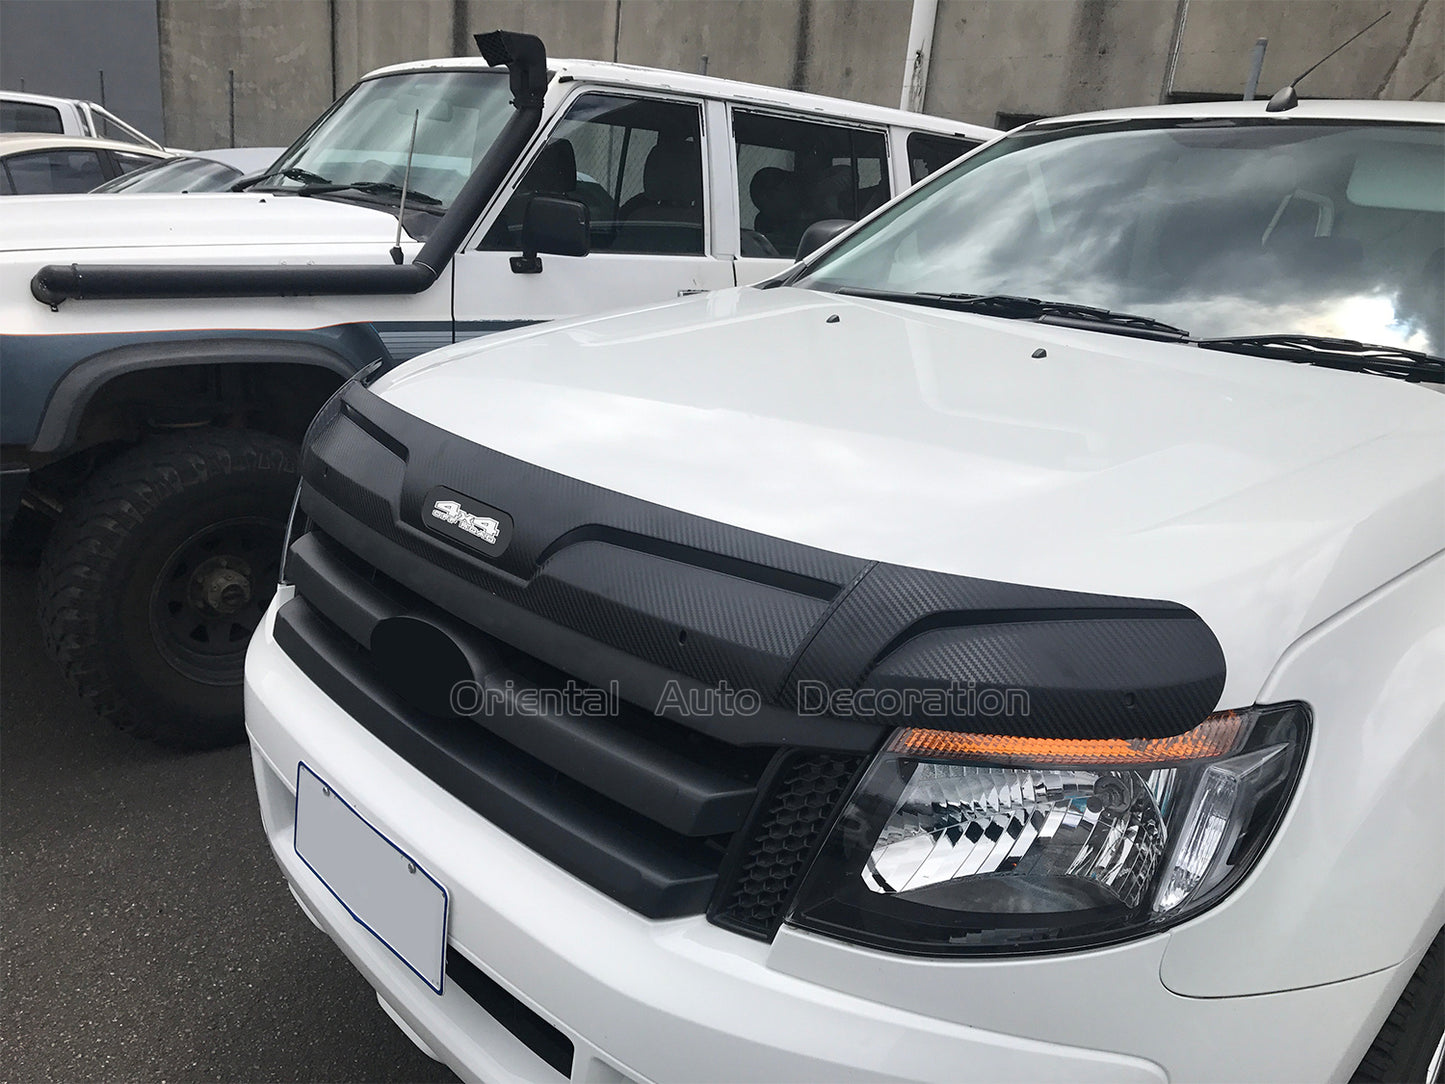 Injection Bonnet Protector & Injection Weathershield for Ford Ranger Dual Cab 2012-2015 Weather Shields Window Visor + Hood Protector Bonnet Guard